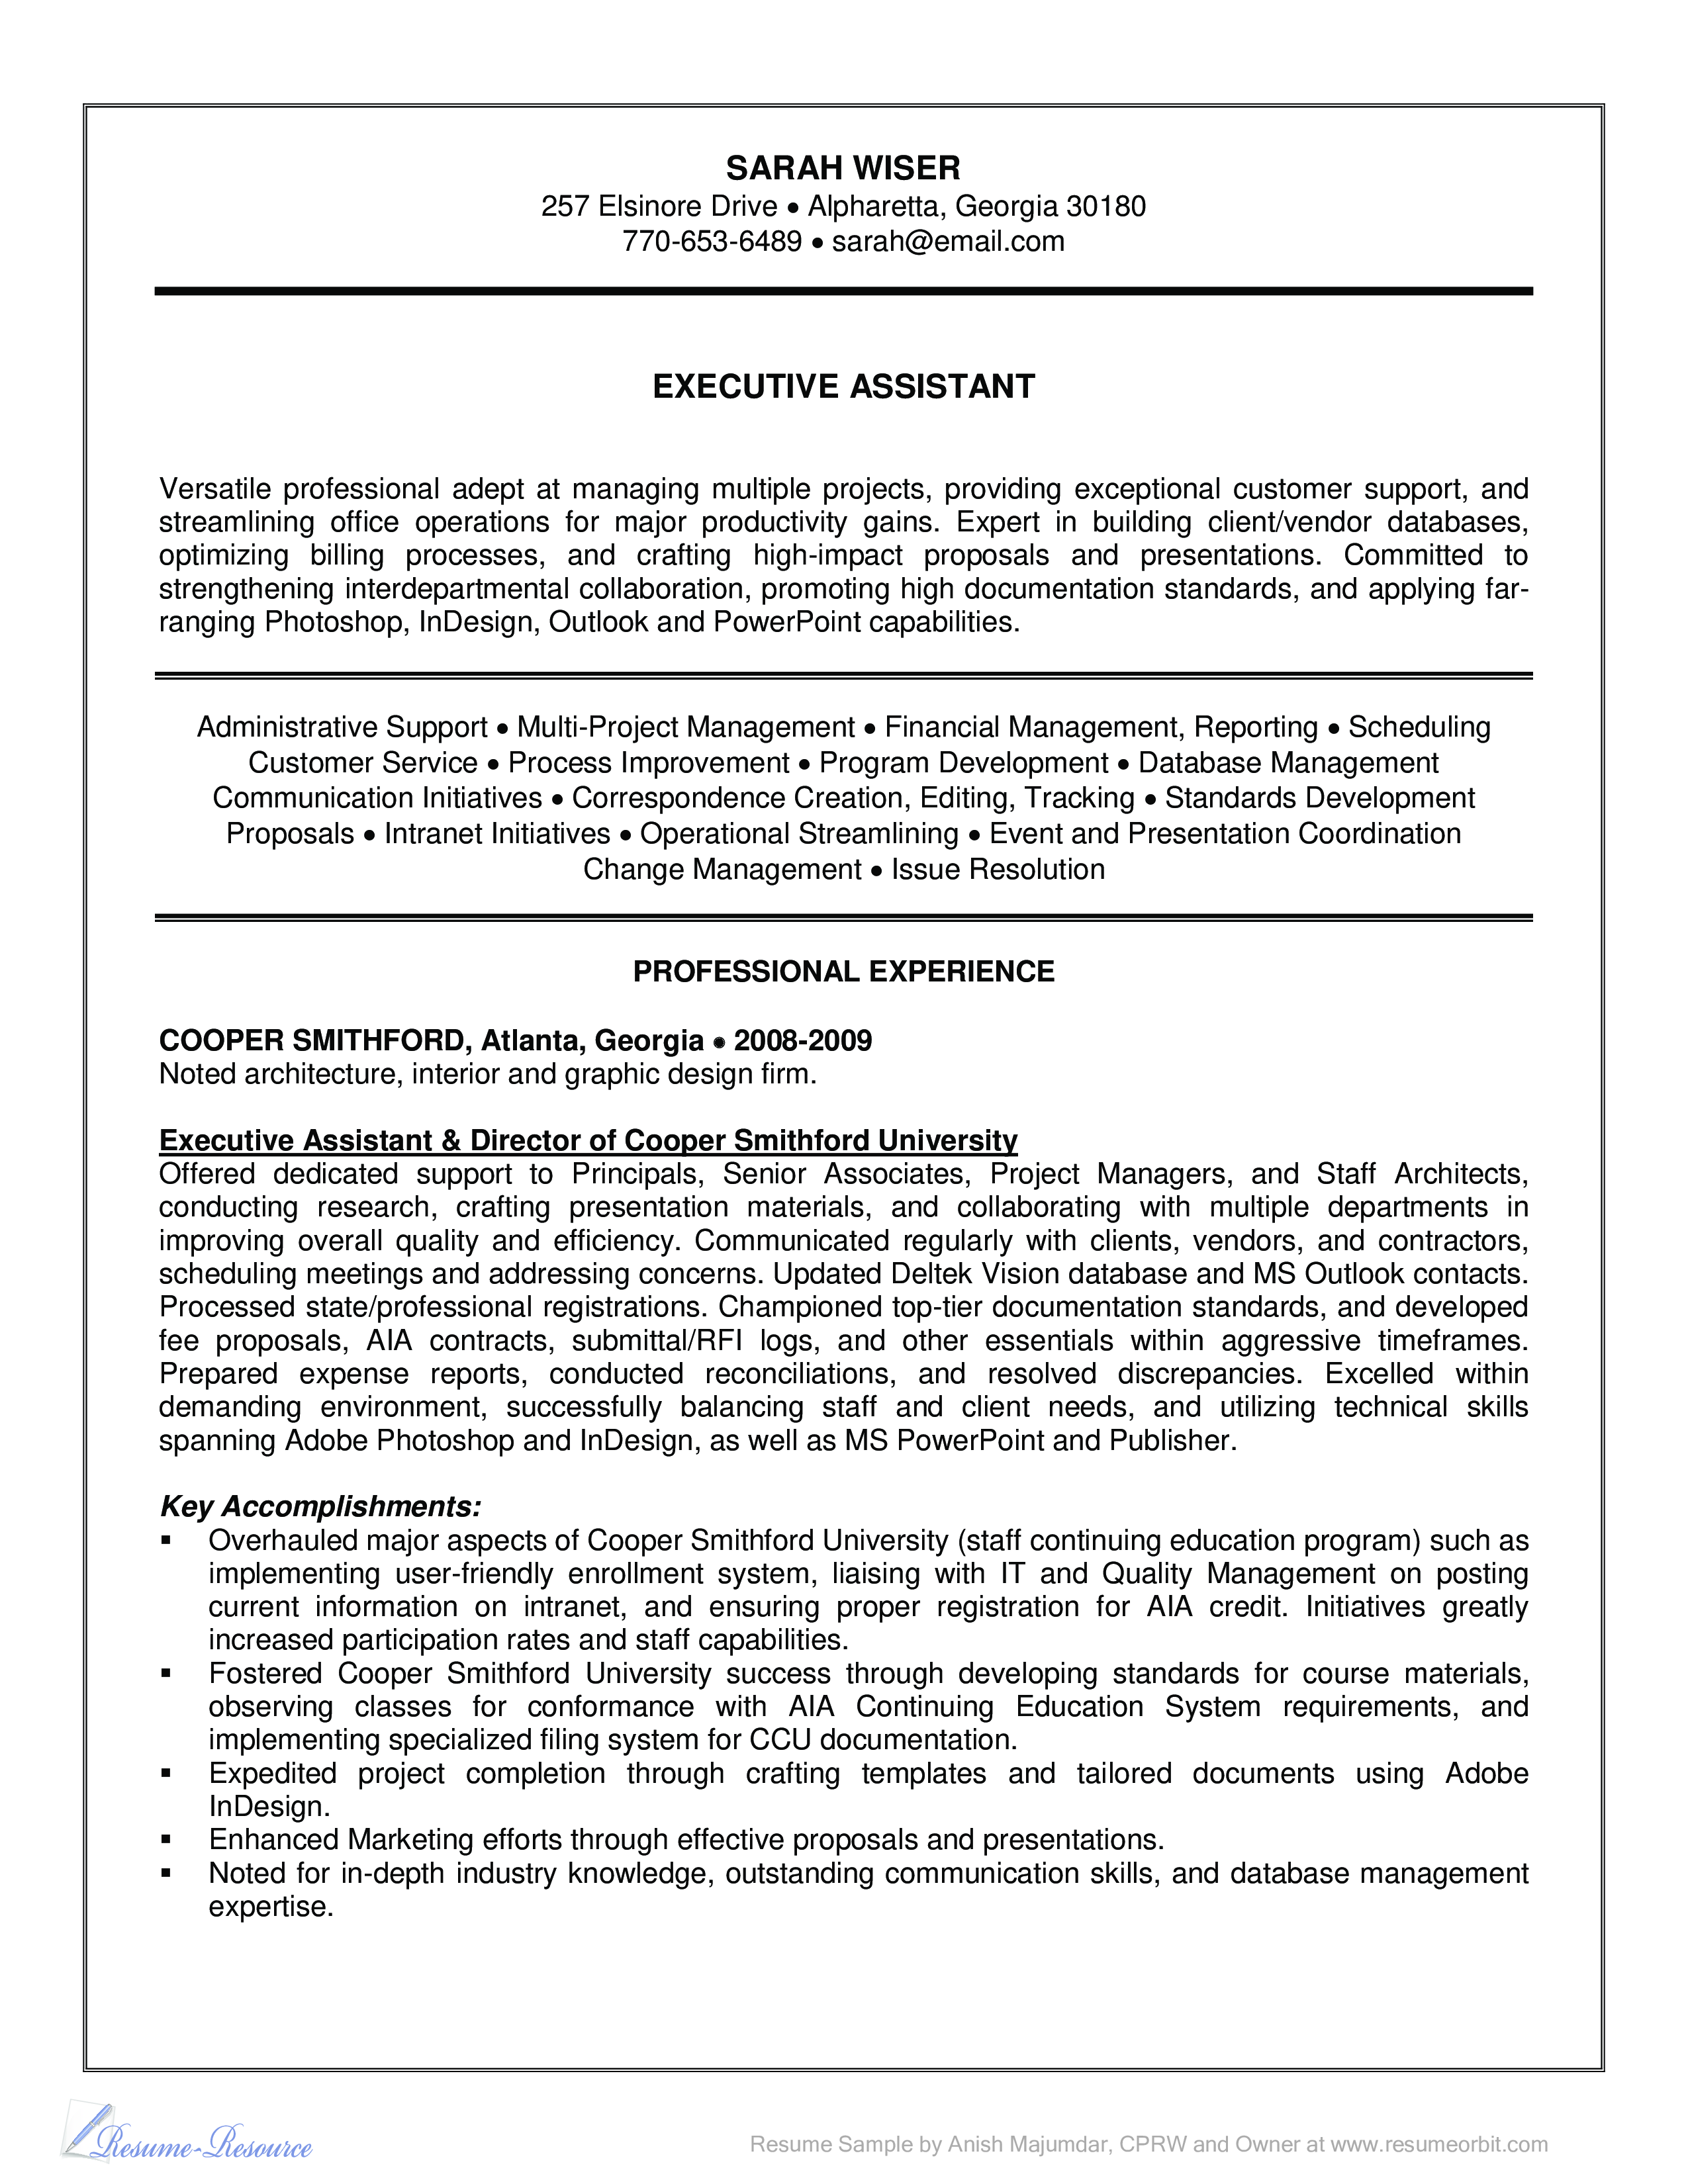 opening statement on resume for executive assistant